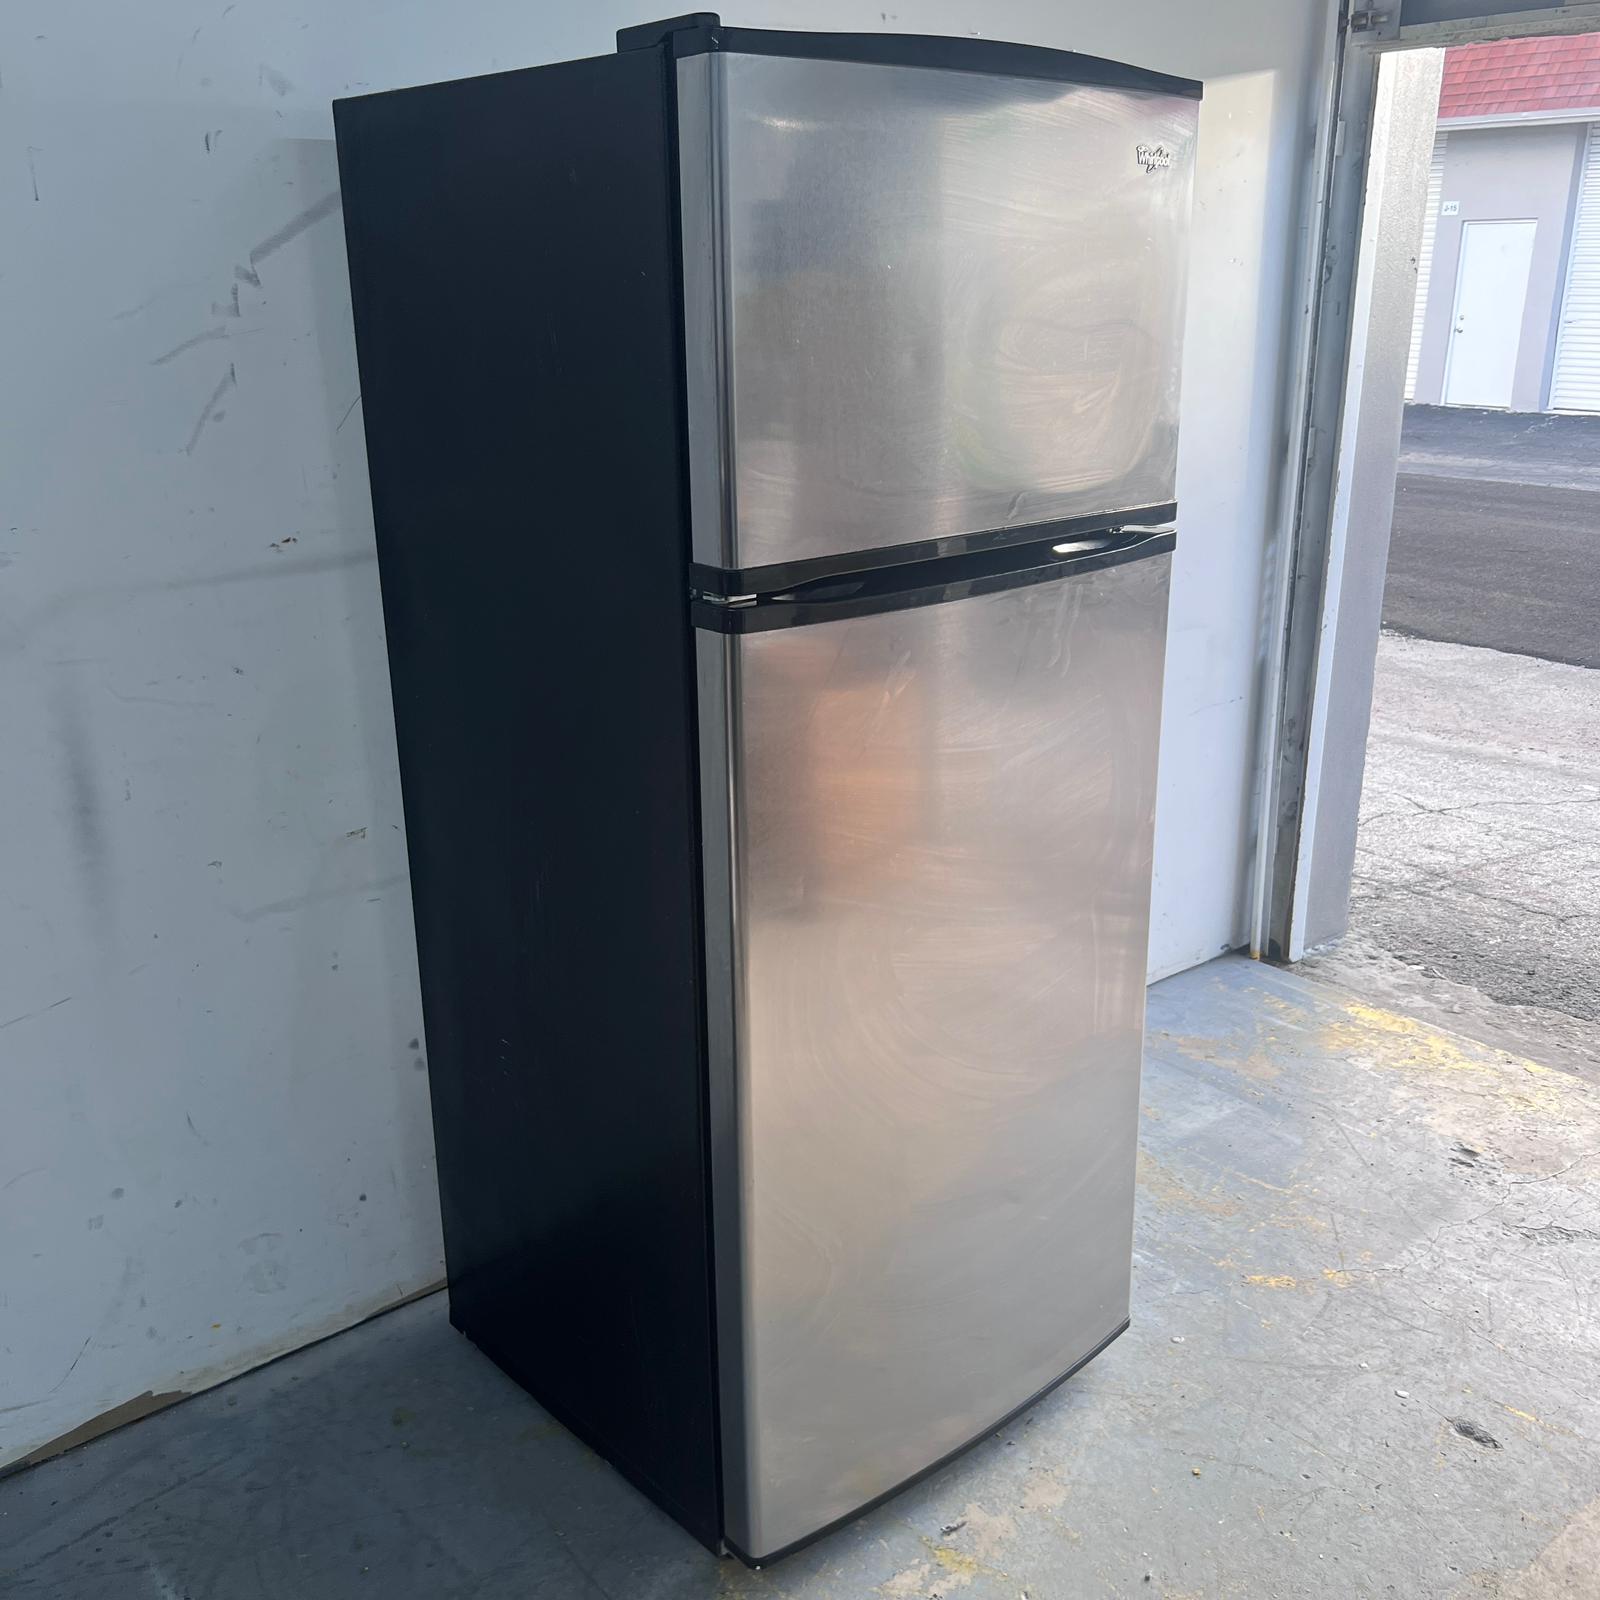 Whirlpool Stainless Steel Top and Bottom Refrigerator